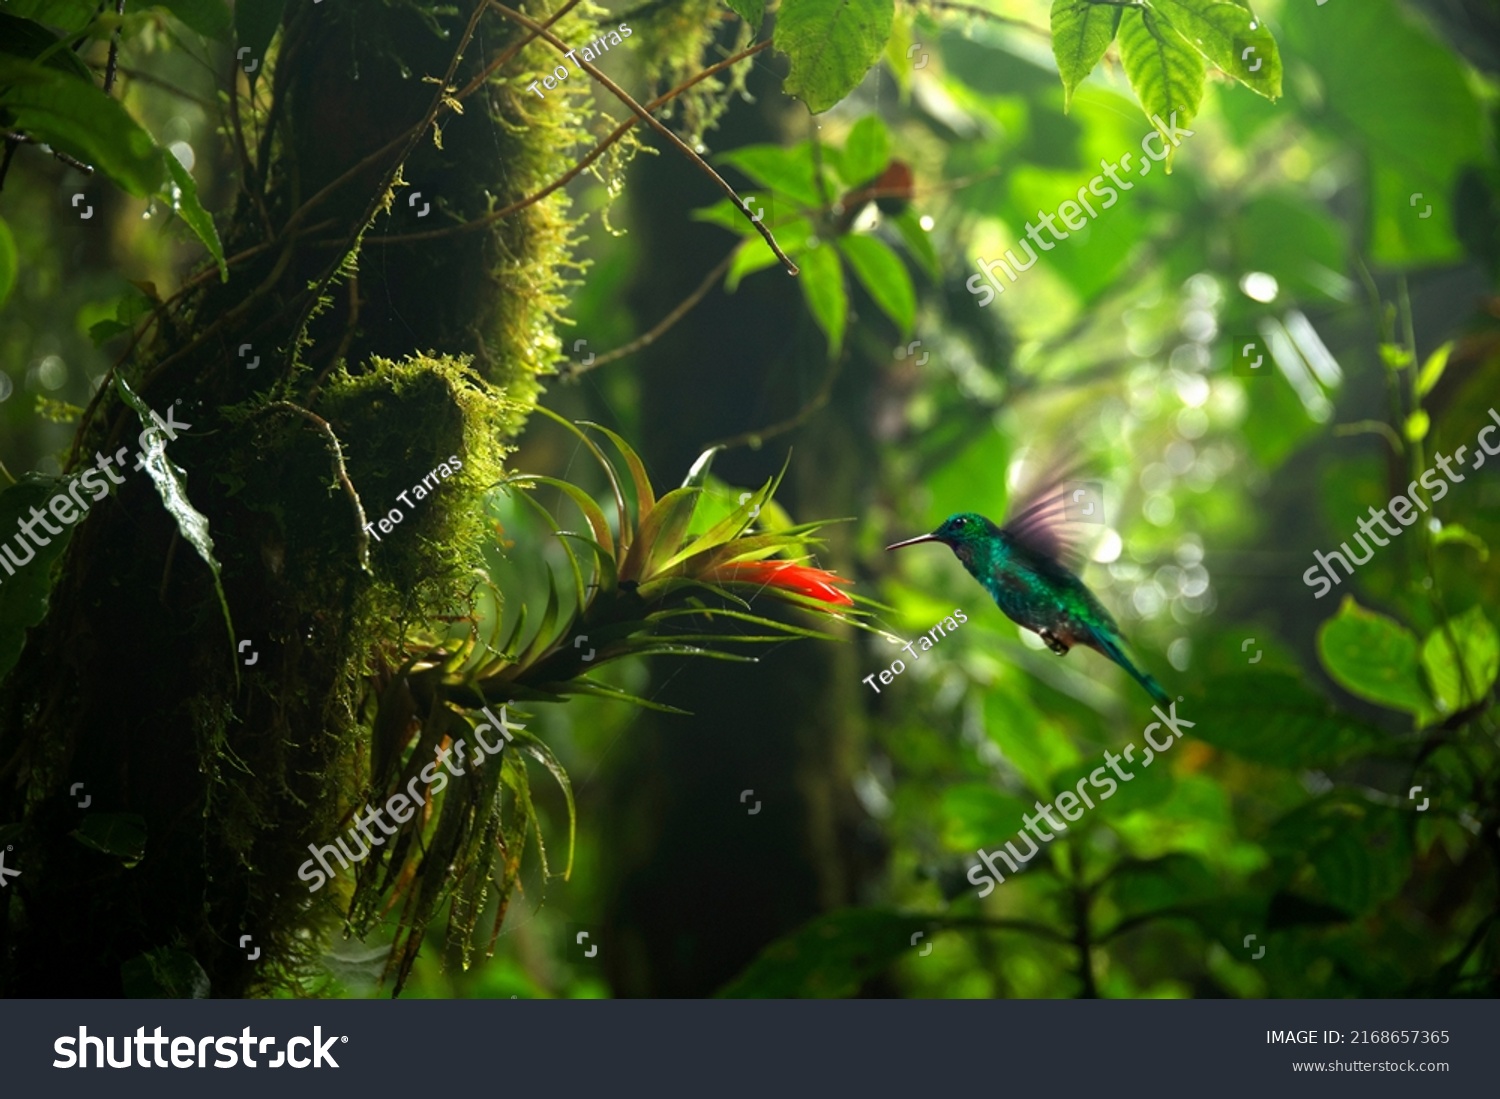 Focus selection. Hummingbird in the rain forest of Costa Rica #2168657365